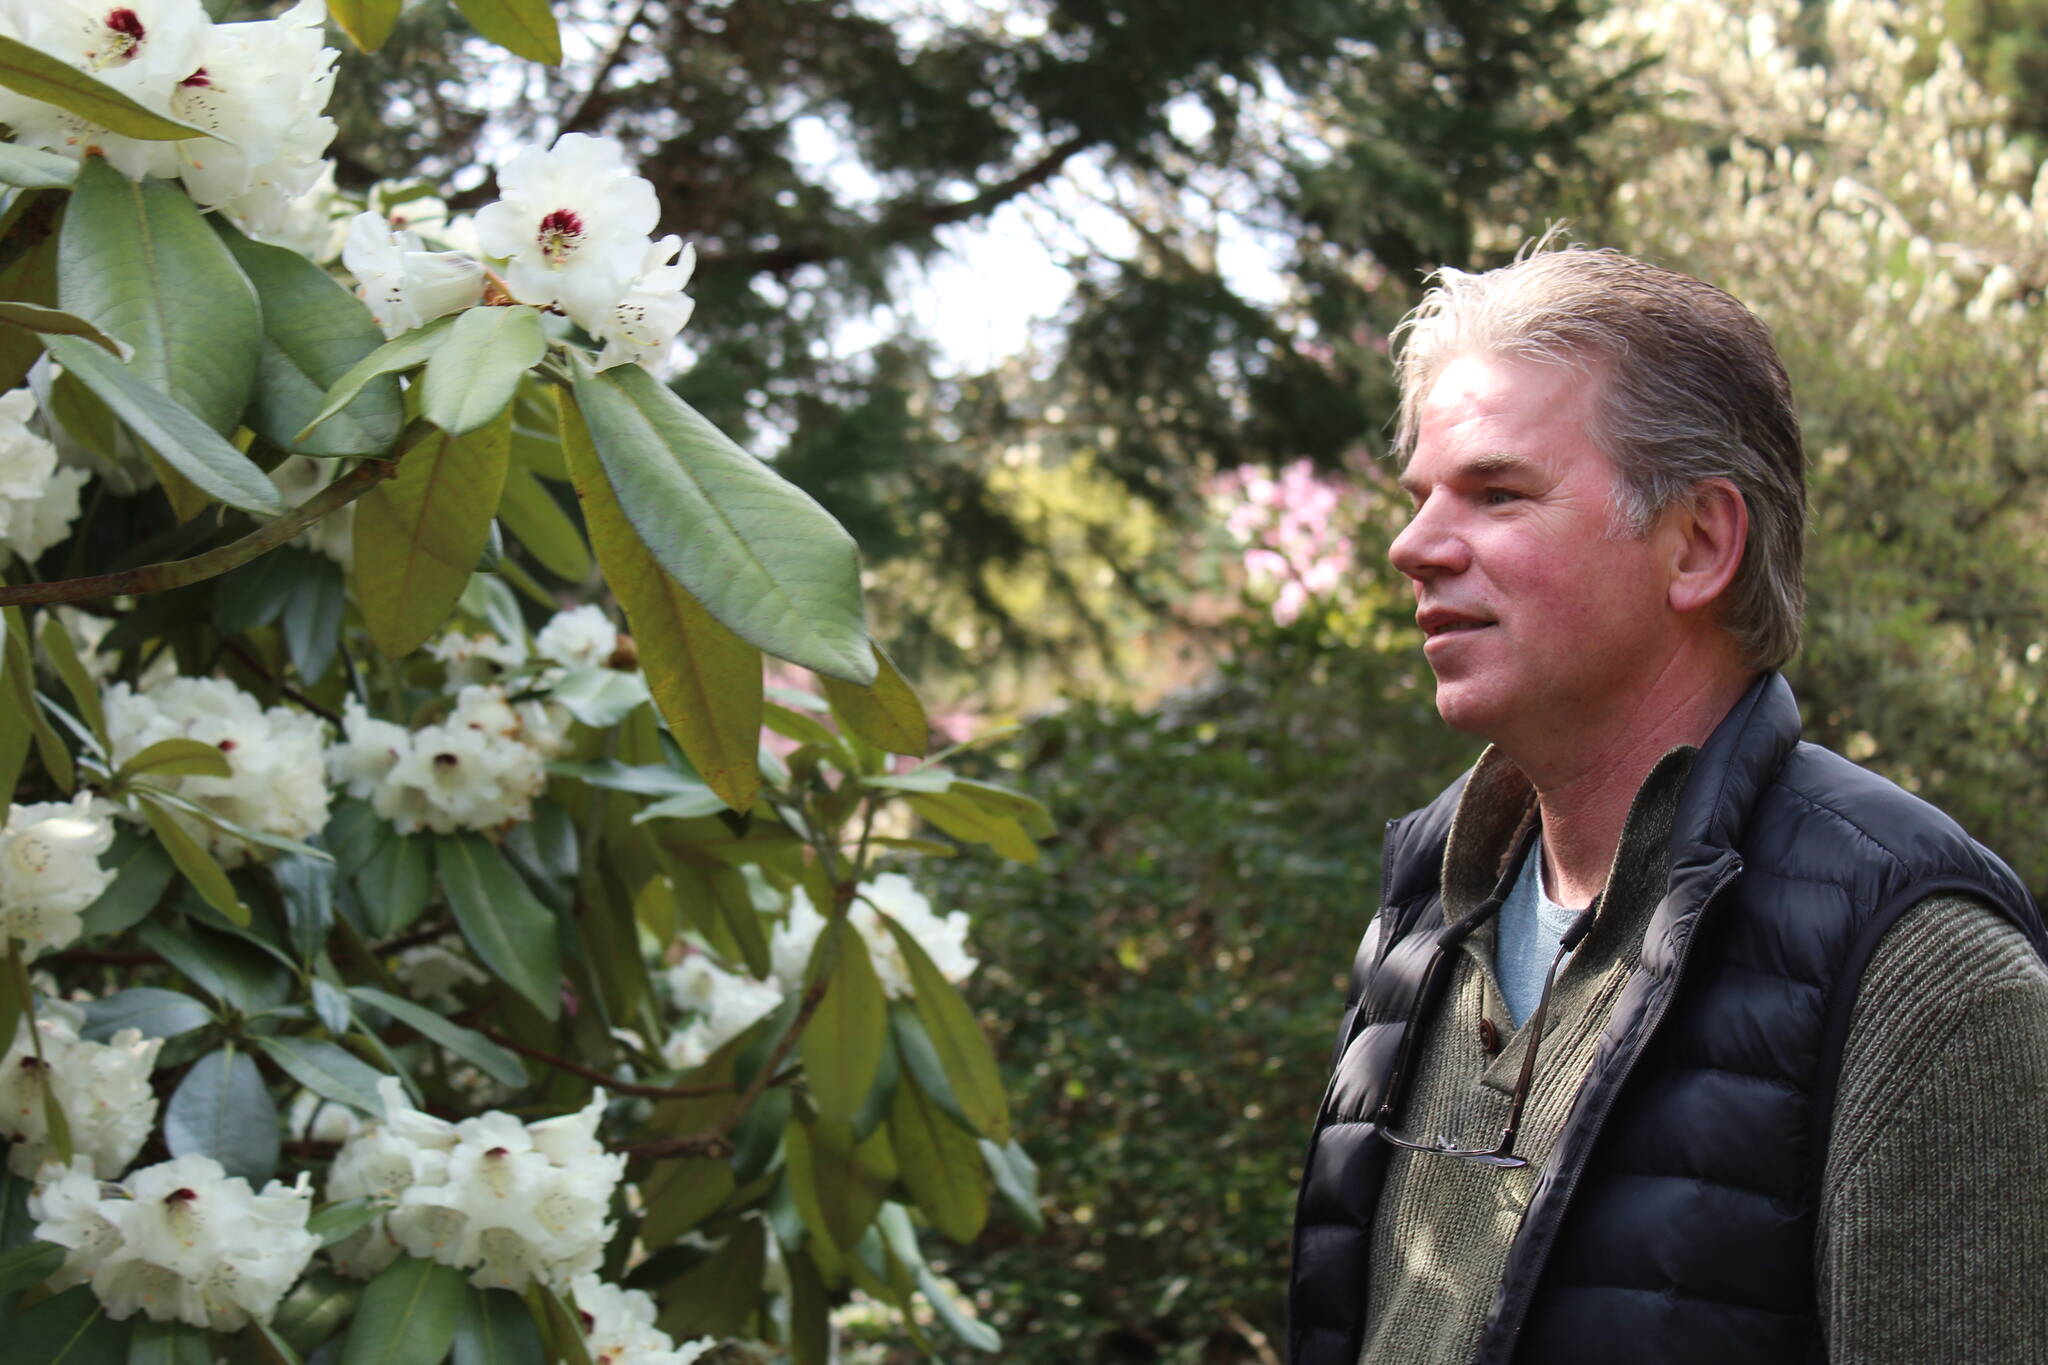 Ron Newberry enjoys Meerkerk Gardens’ world-renowned rhododendrons. The gardens have just entered peak blooming season. (Photo by Karina Andrew/Whidbey News-Times)